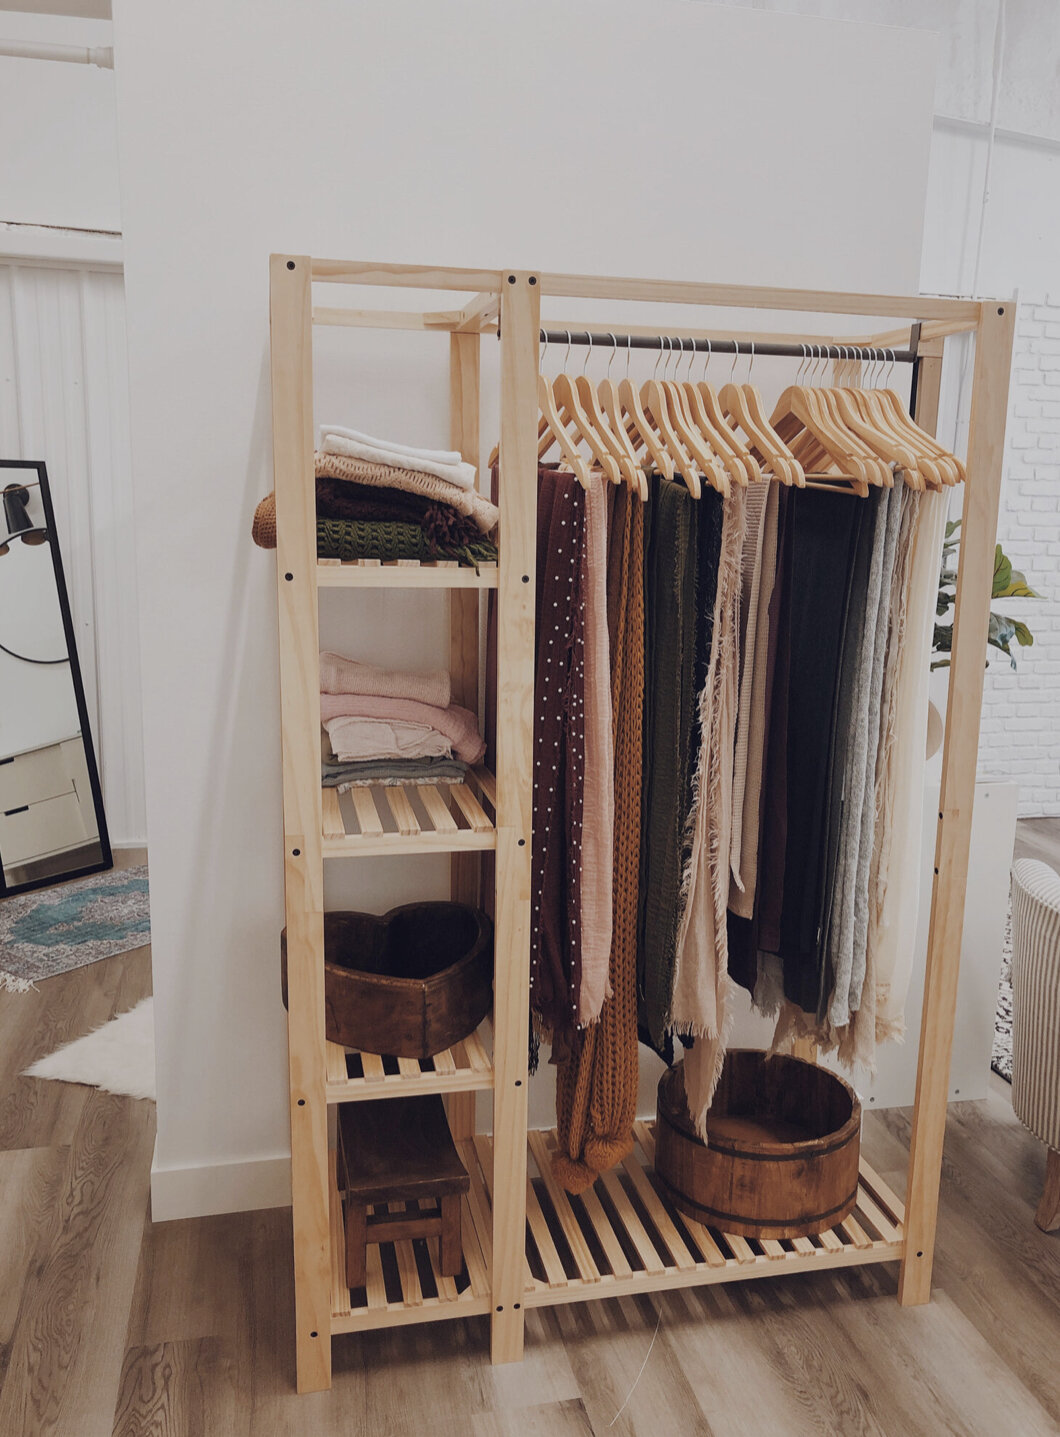 The studio also features a private changing room with a full length mirror, seating and changing table. The changing room is perfect for changing or feeding your baby in private.